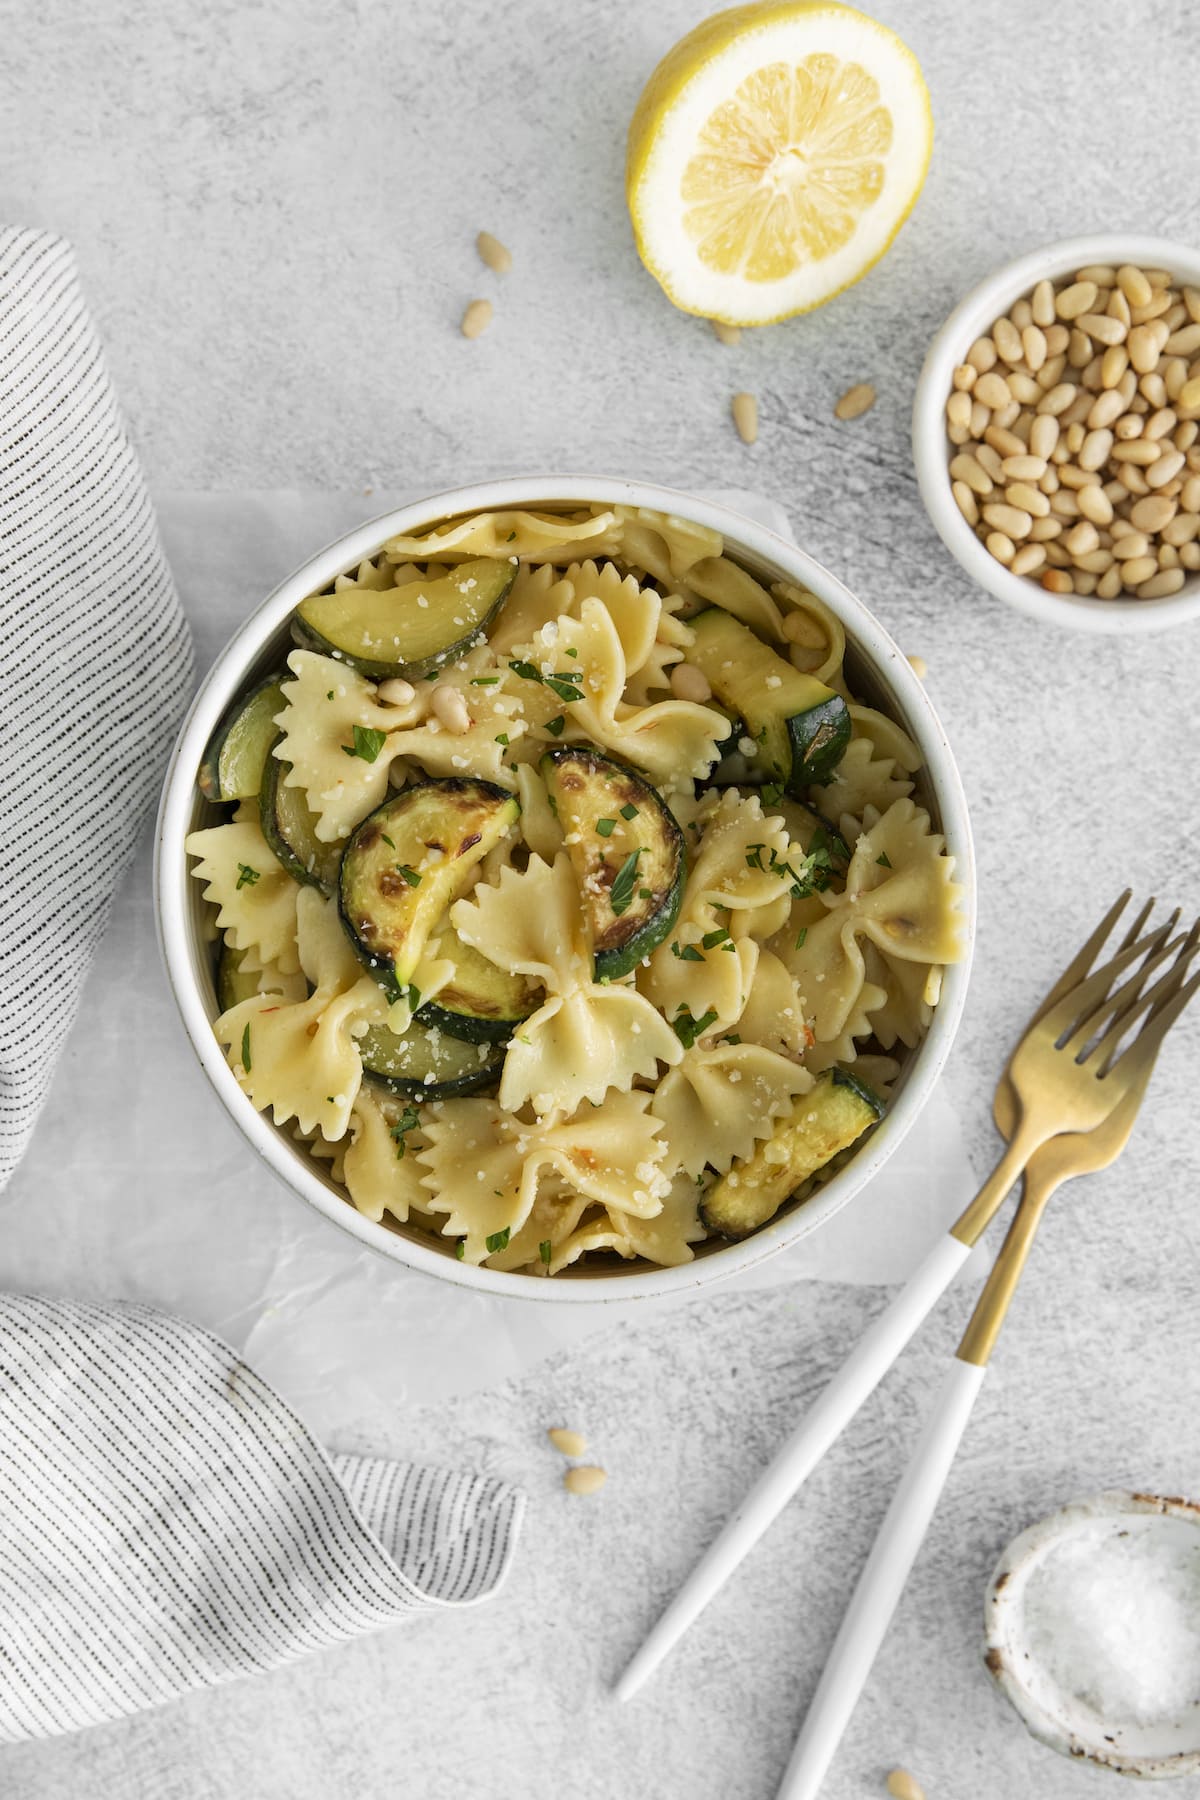 bowtie pasta with browned zuccini slices, parmesan cheese, pine nuts, and herbs in a bowl on a table next to a fork and a lemon cut in half